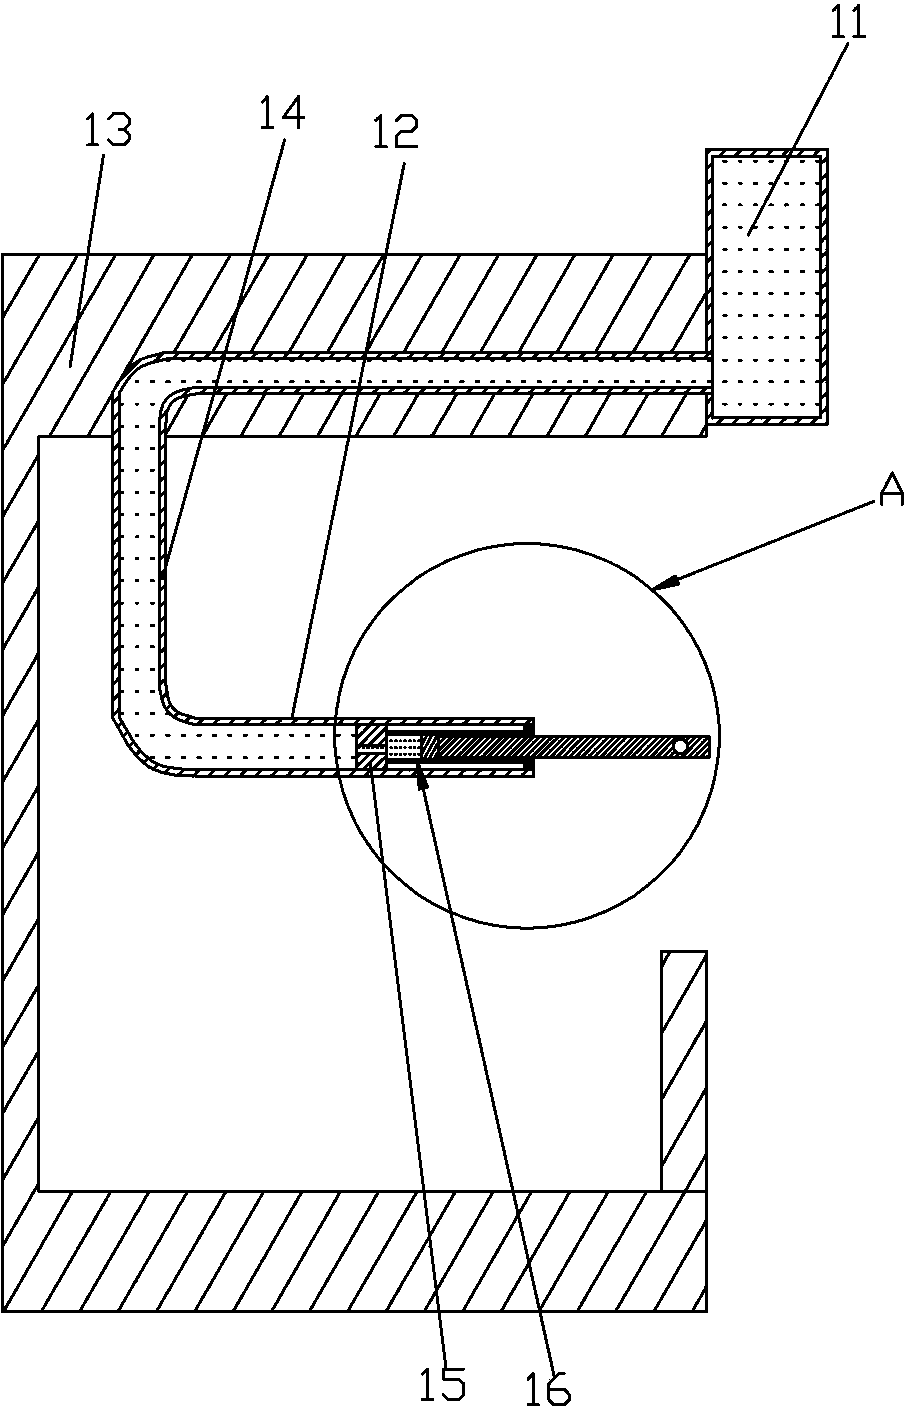 Clothes rack capable of stretching and retracting automatically